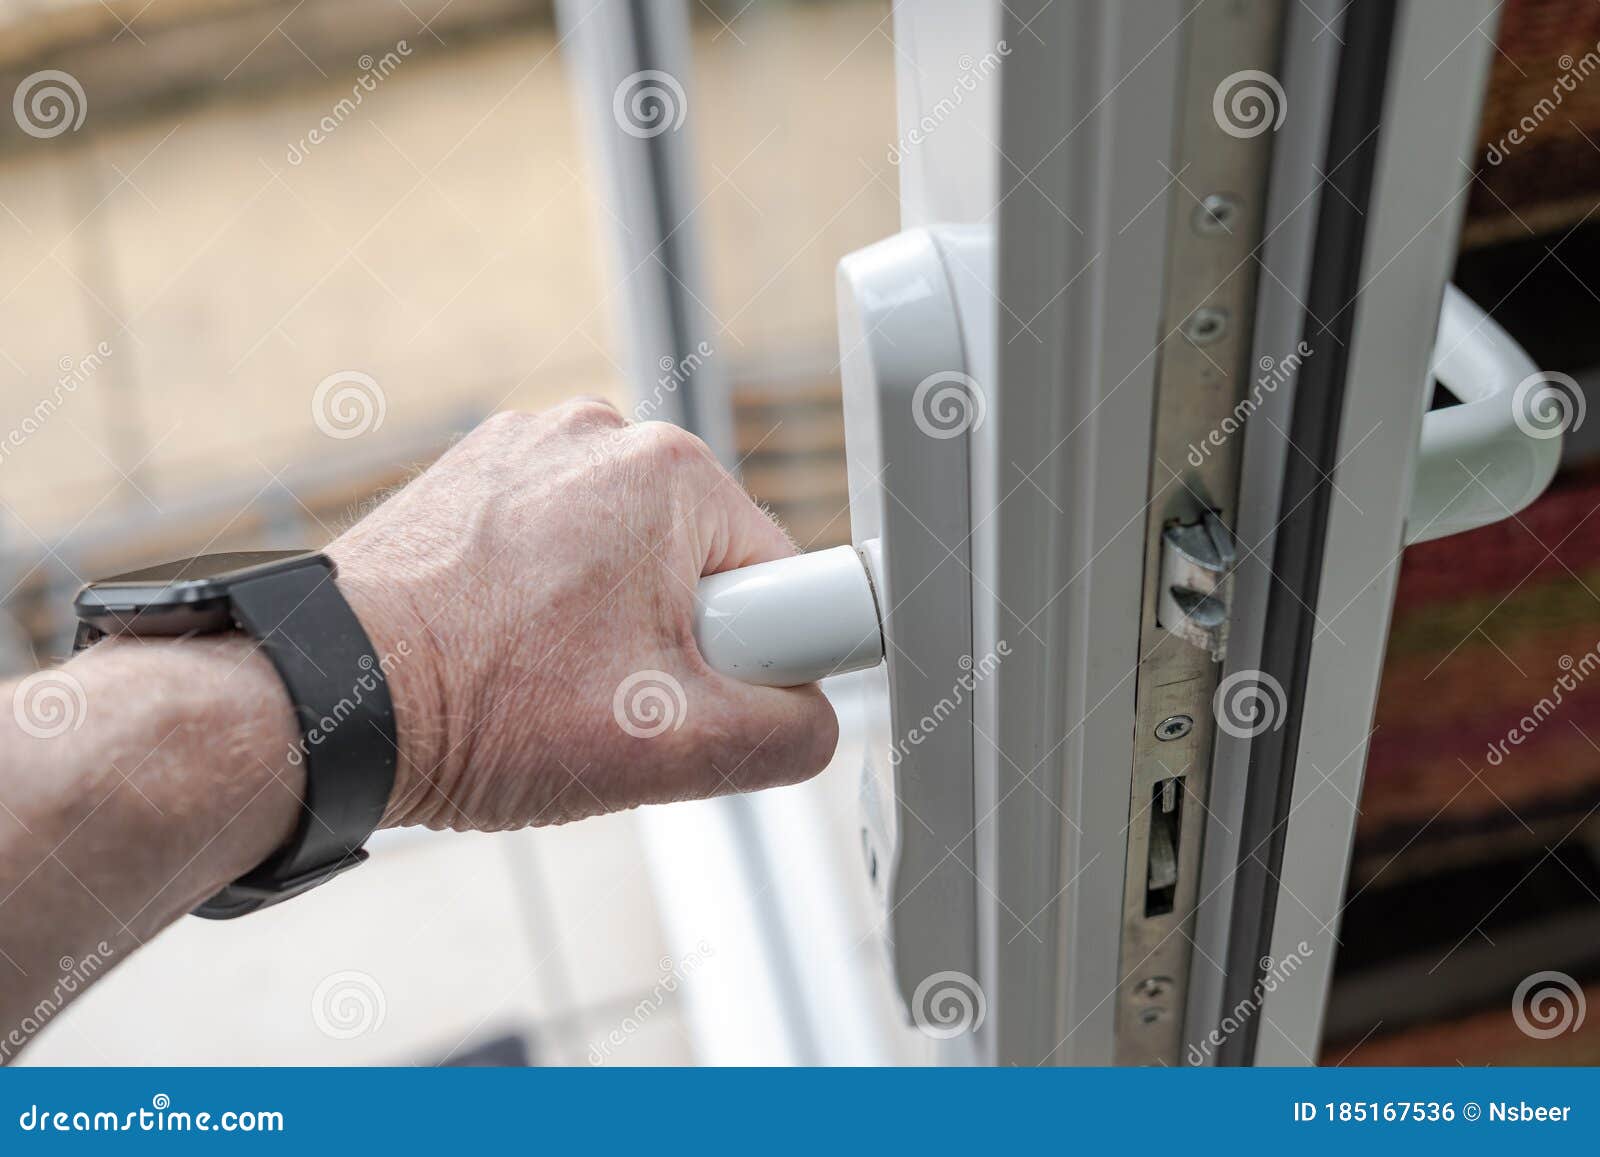 homeowner seen gripping the handle of a newly installed upvc high security door.